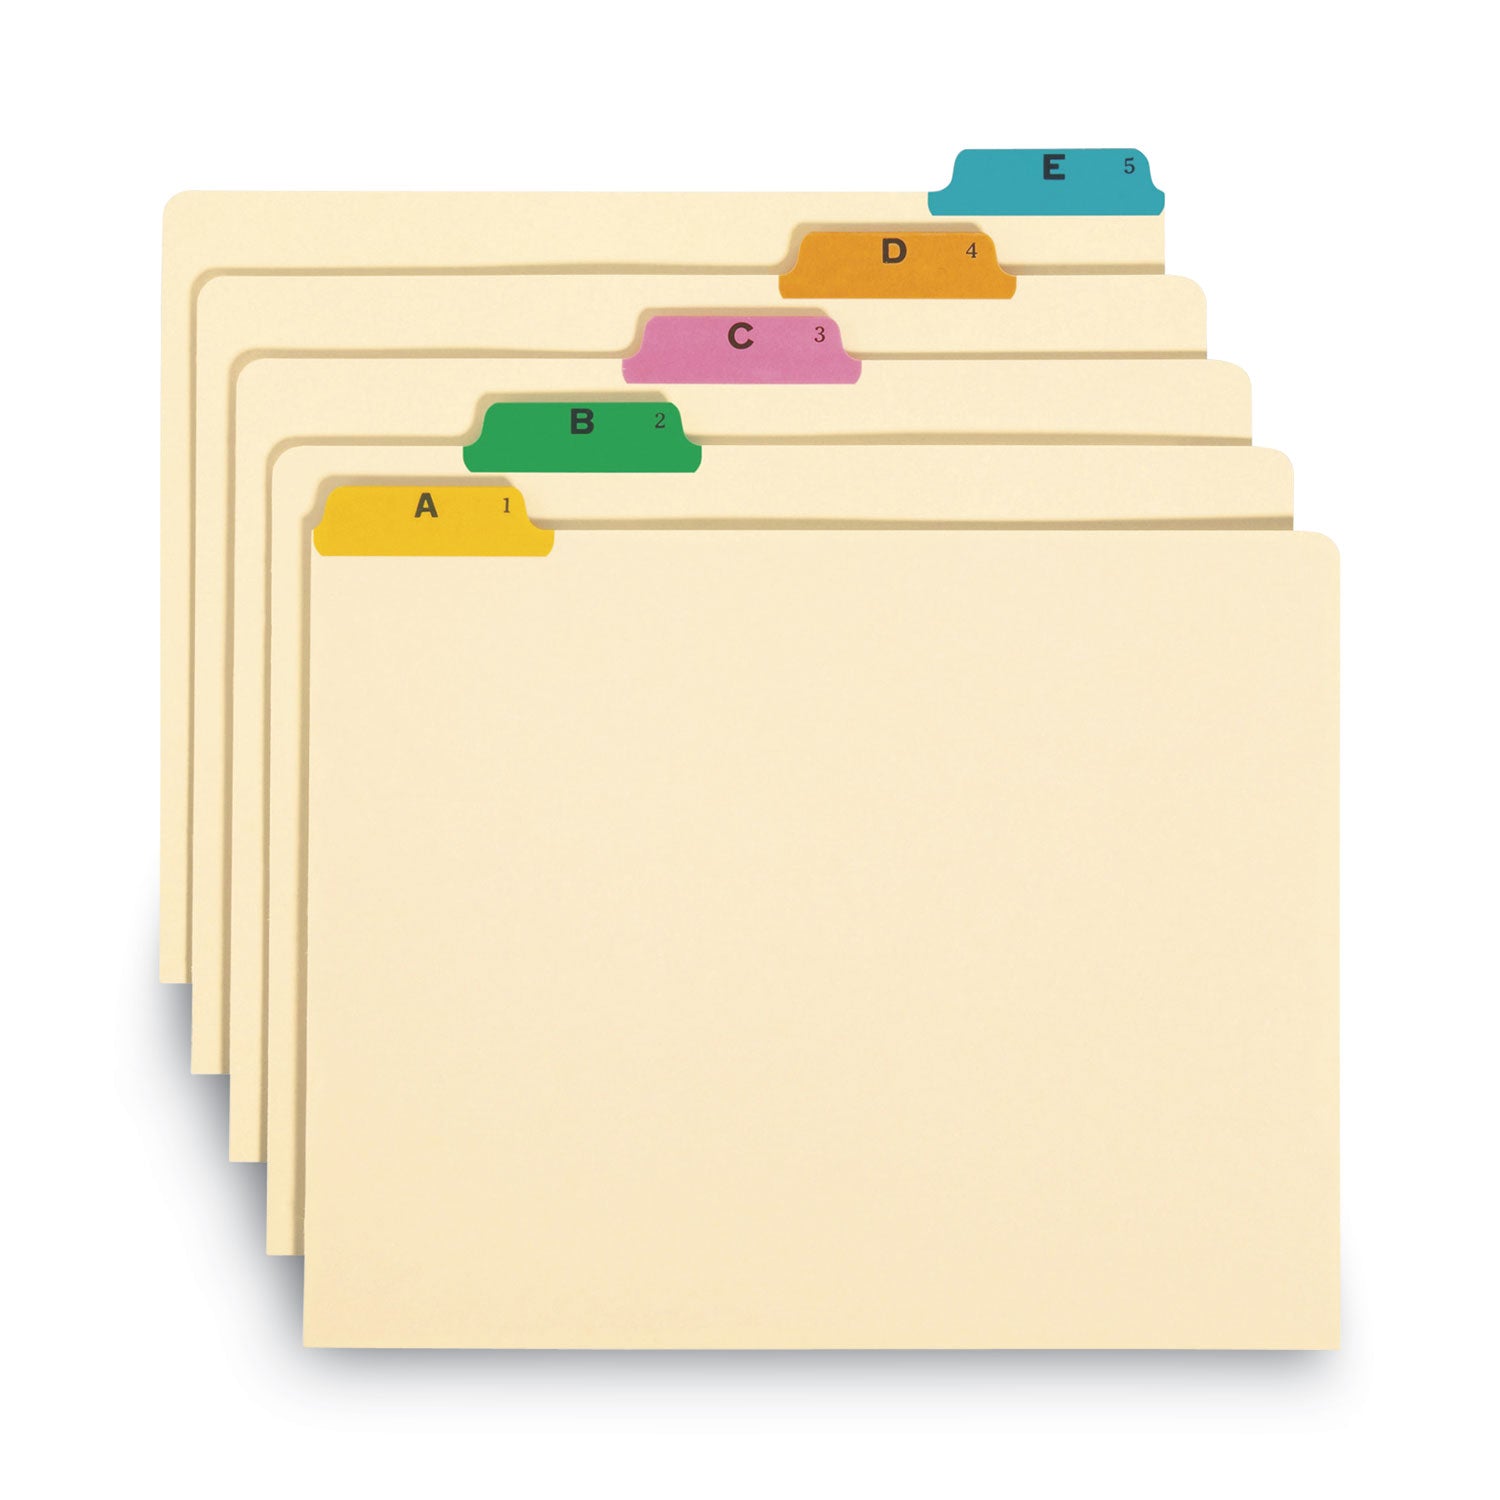 Alphabetic Top Tab Indexed File Guide Set, 1/5-Cut Top Tab, A to Z, 8.5 x 11, Manila, 25/Set - 